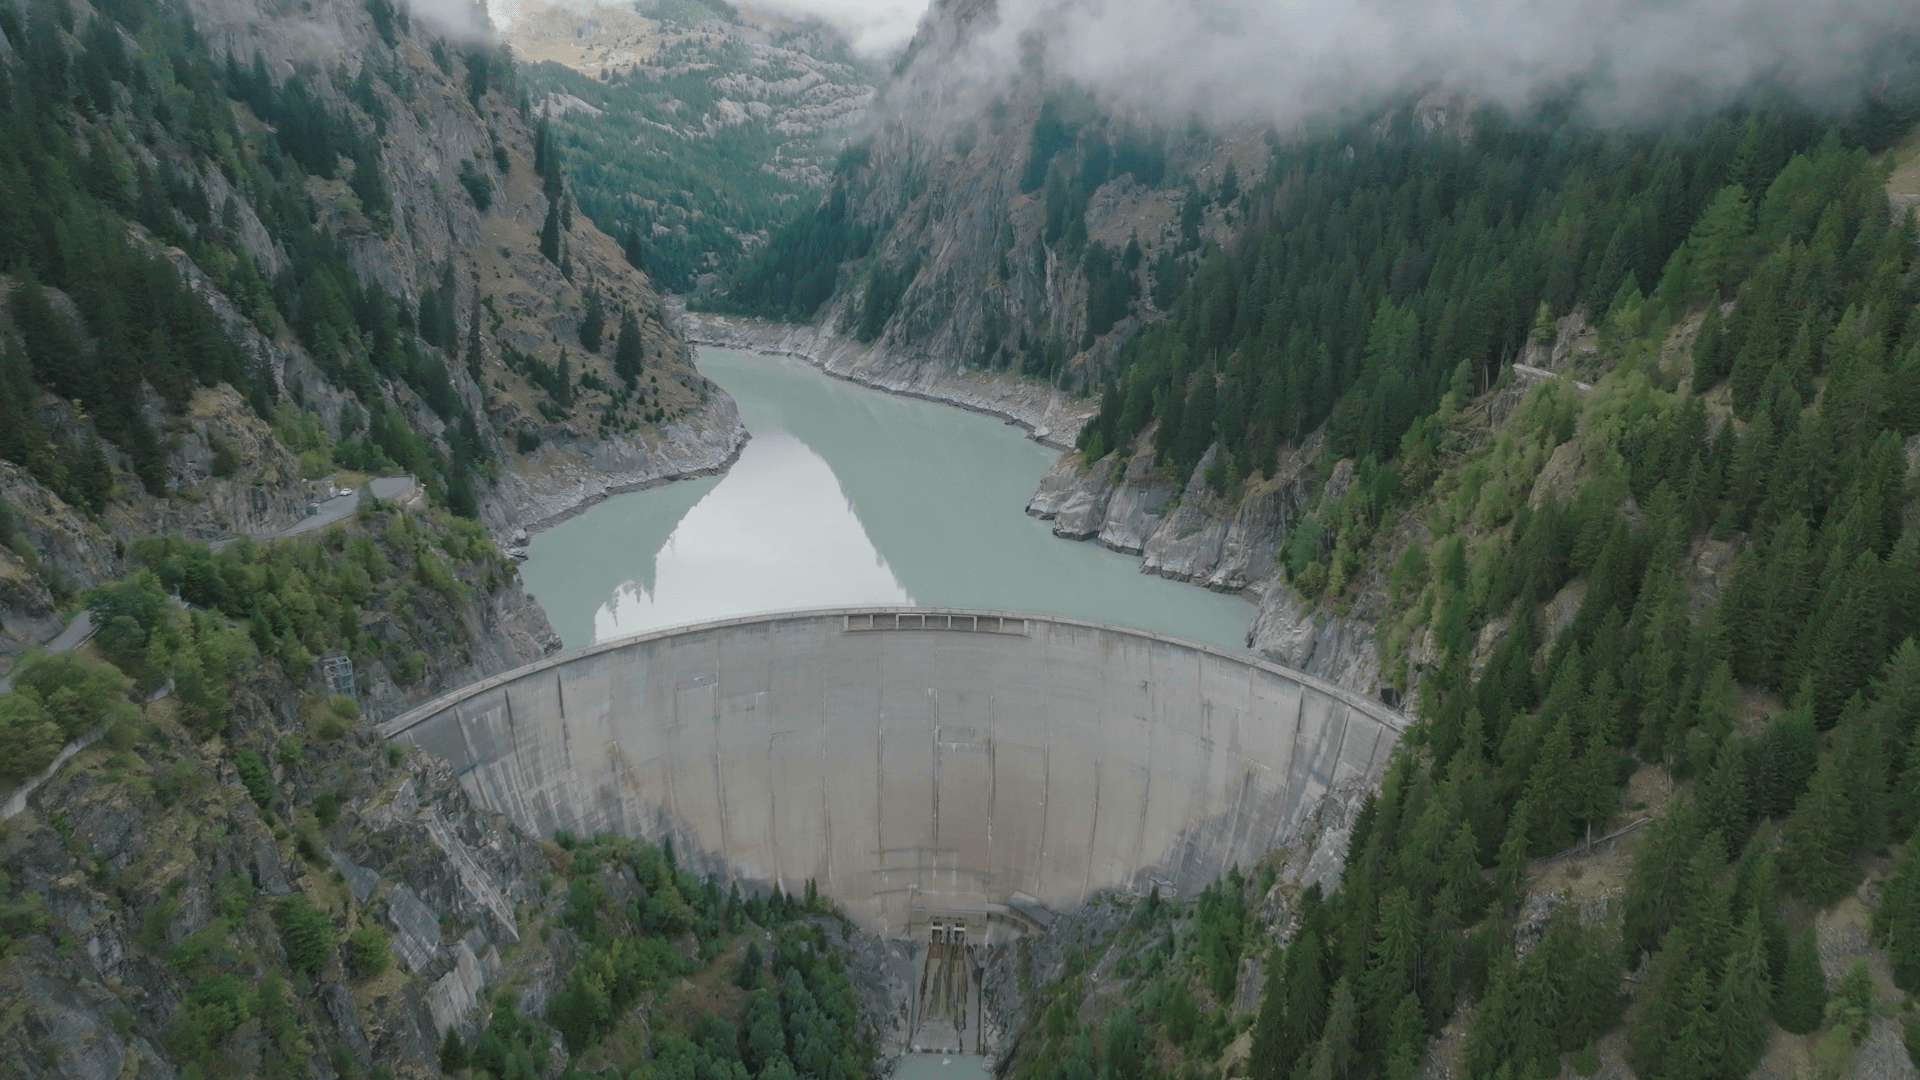 Aerial view over hydropower dam, looking at front of dam wall with water behind and forests on mountain sides either side of dam